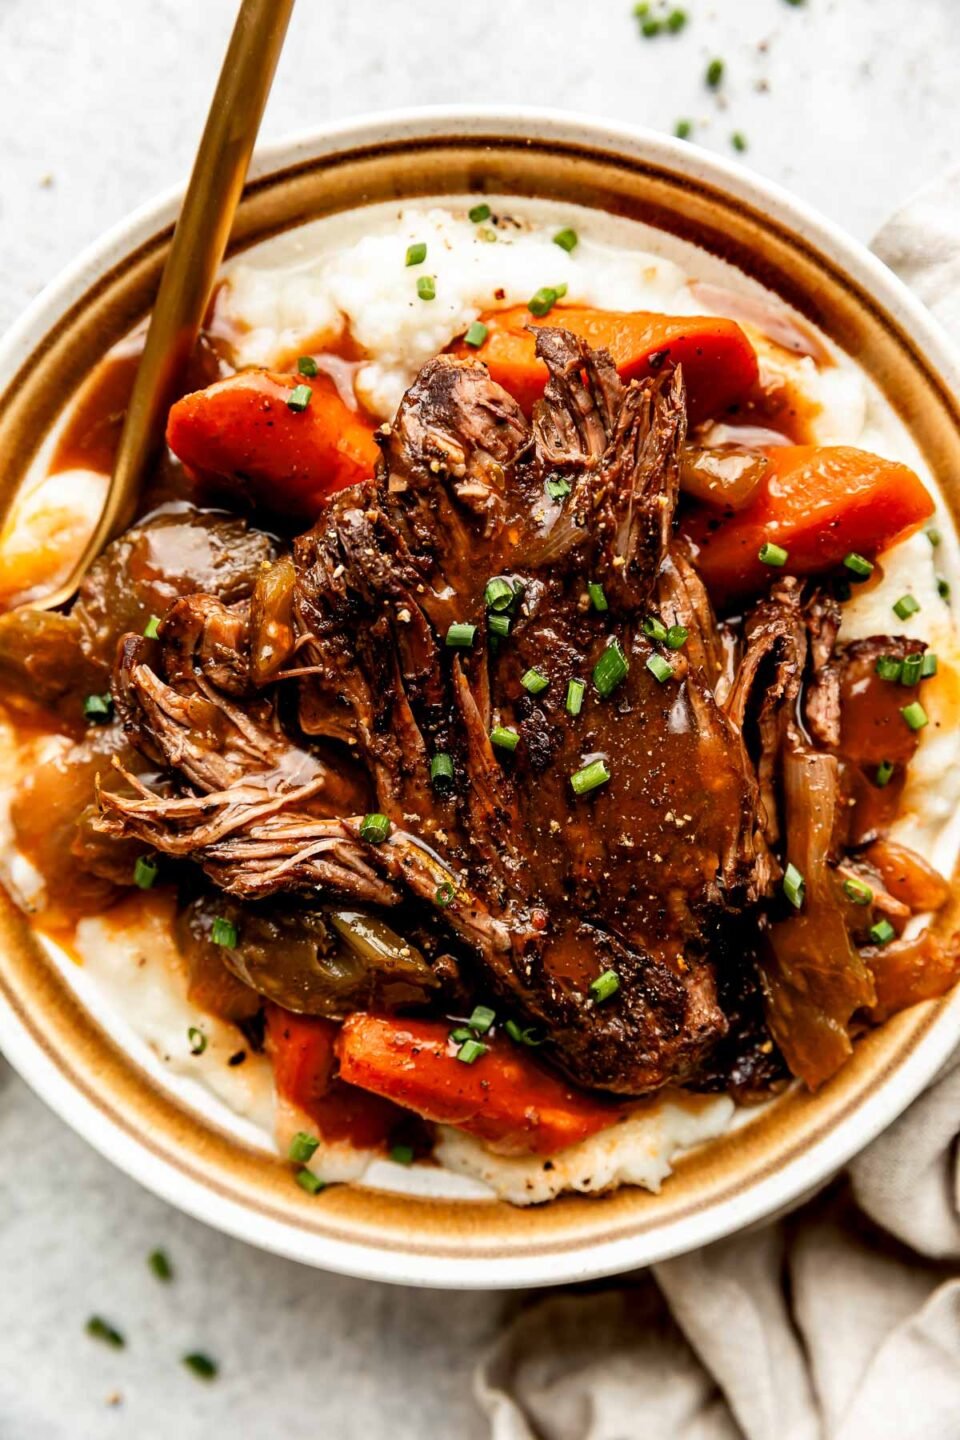 An overhead shot of a serving of braised beef topped with braising liquid on a bed of potatoes and cooked vegetables on a stoneware plate. The plate sits alongside a beige cloth on a light grey surface.